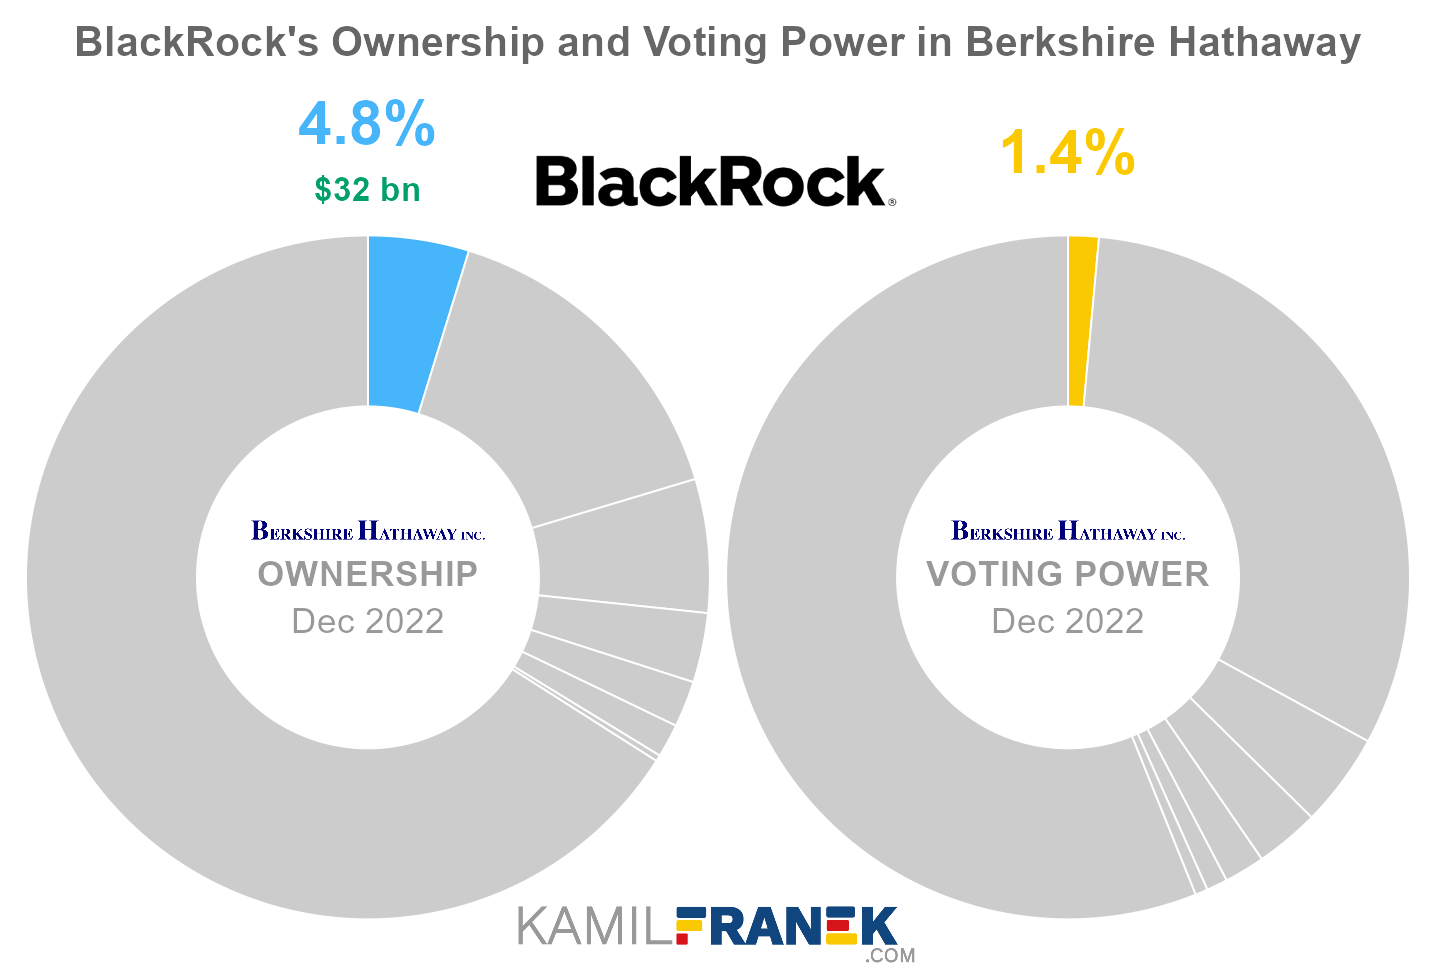 BlackRock's share ownership and voting power in Berkshire Hathaway (chart)